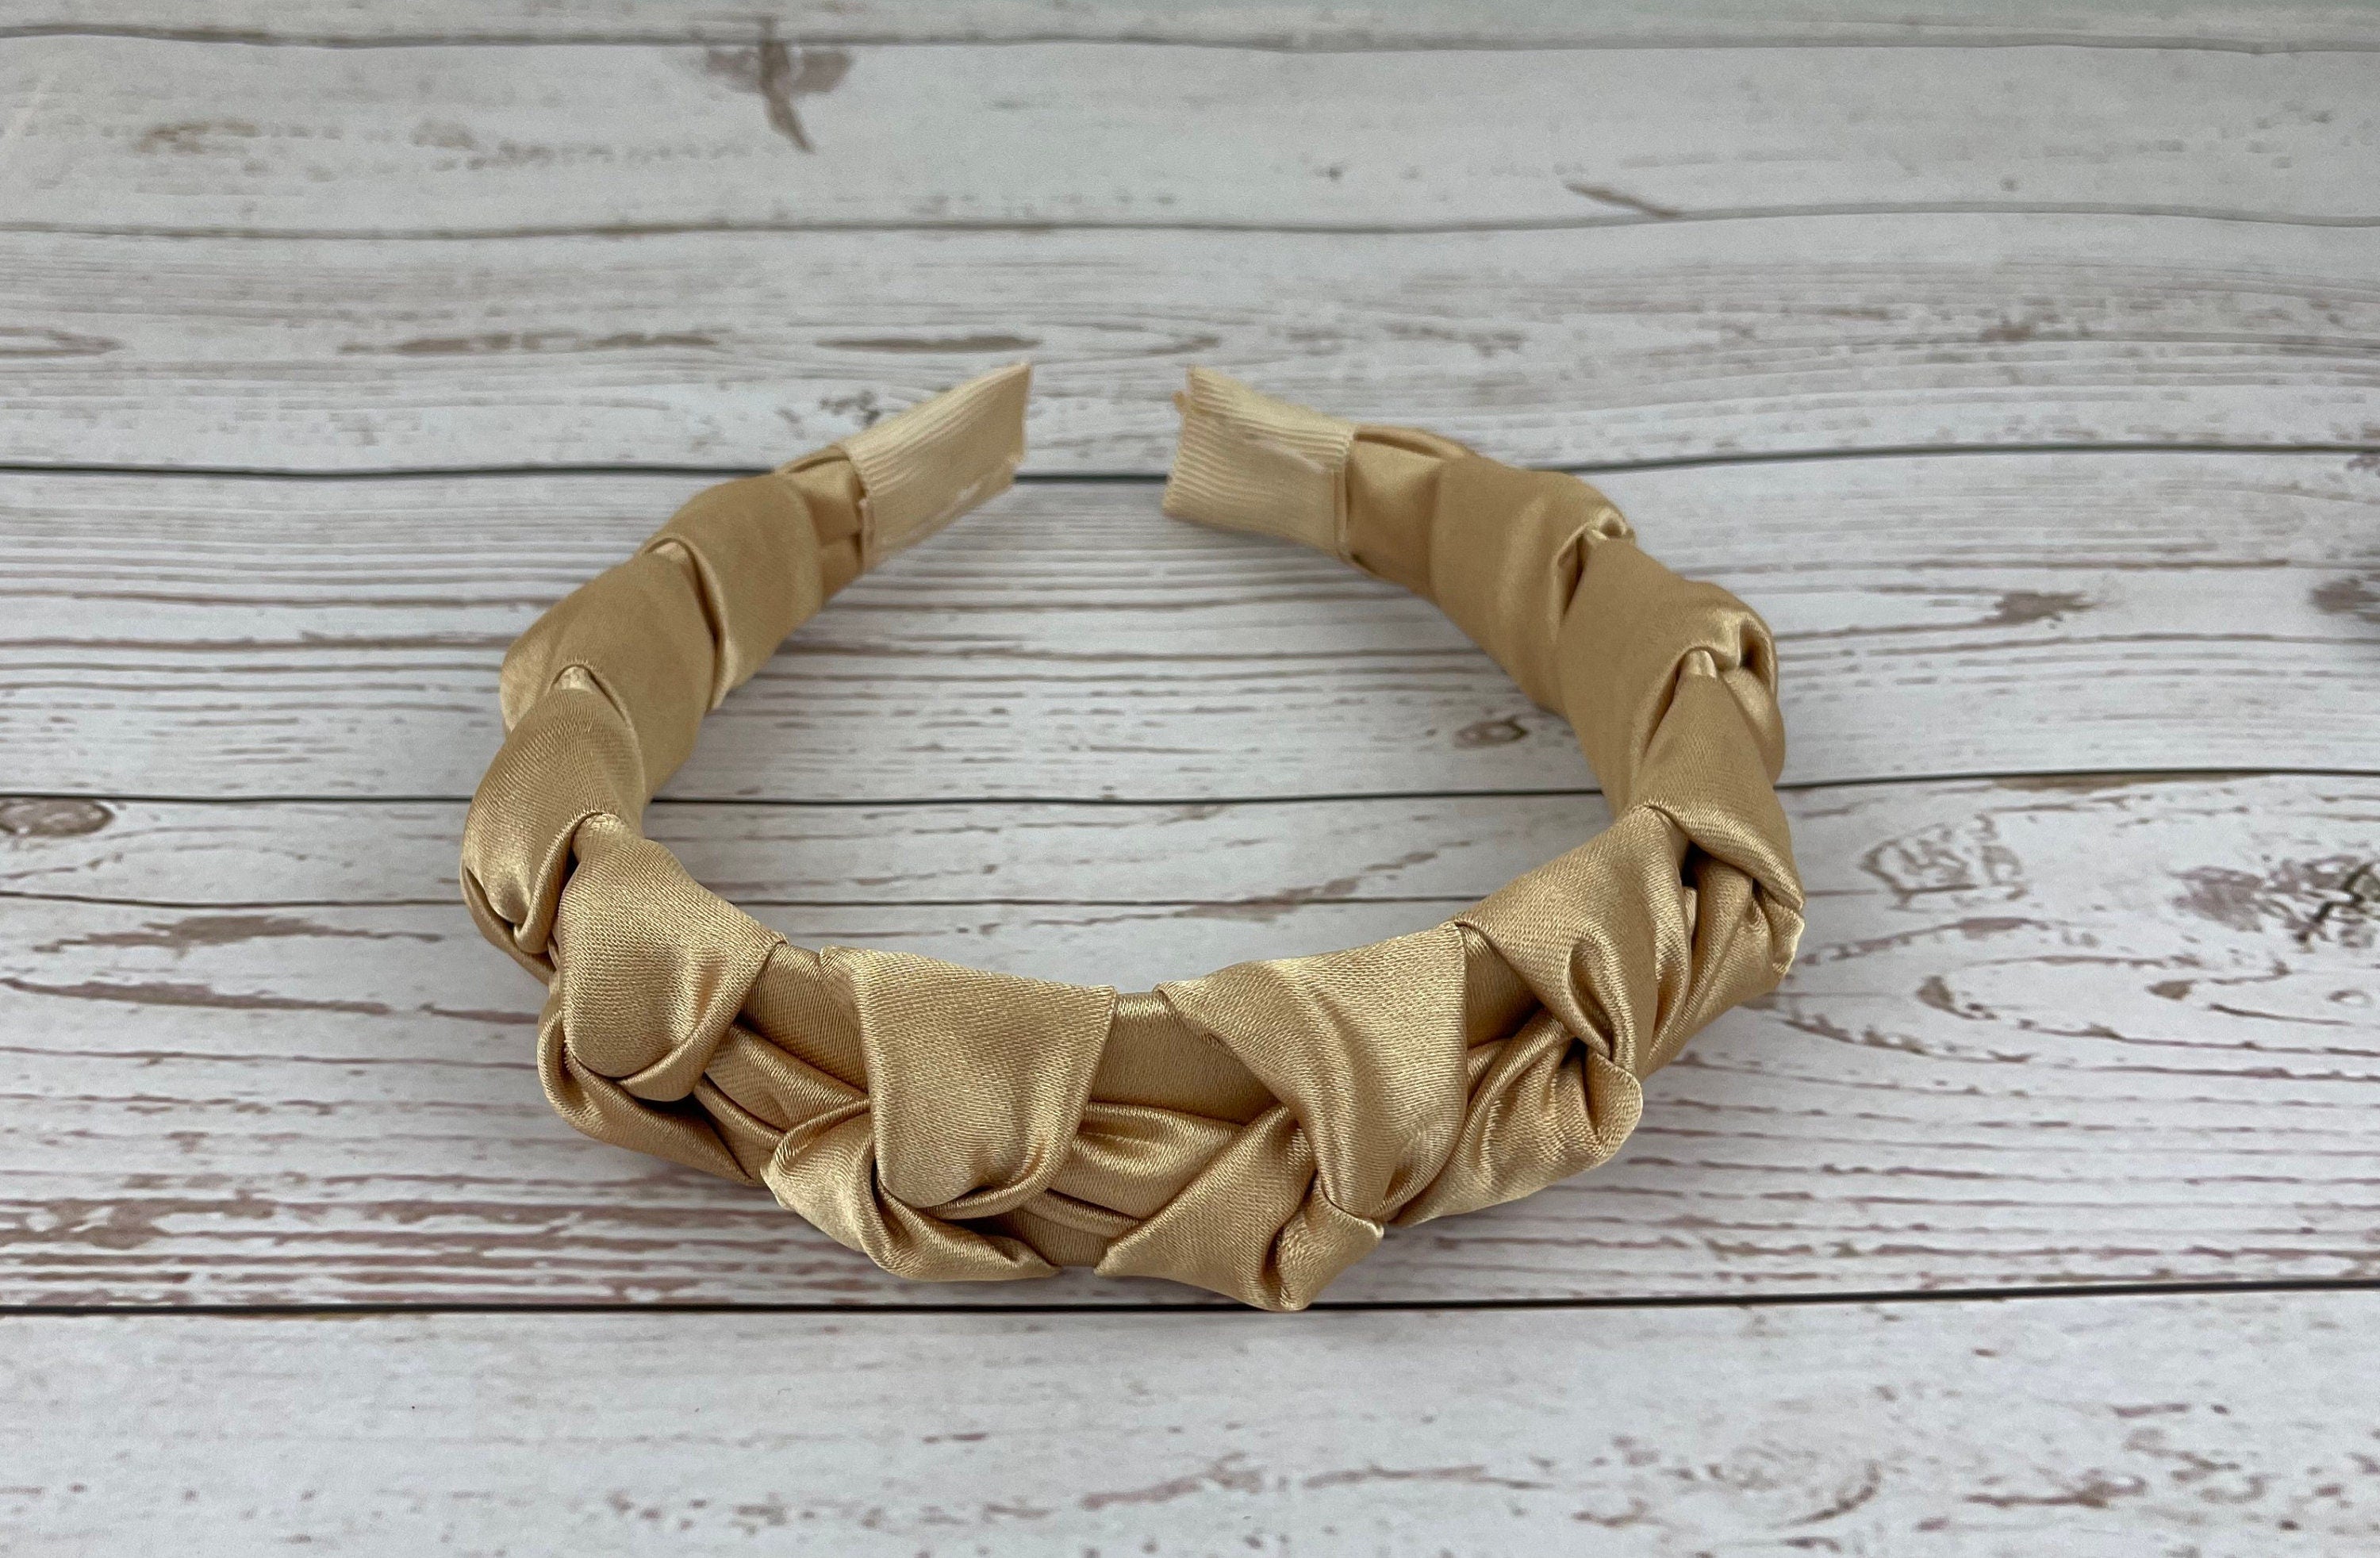 Knotted Headband - Dark Beige Chic Satin Hairband for a fashionable look